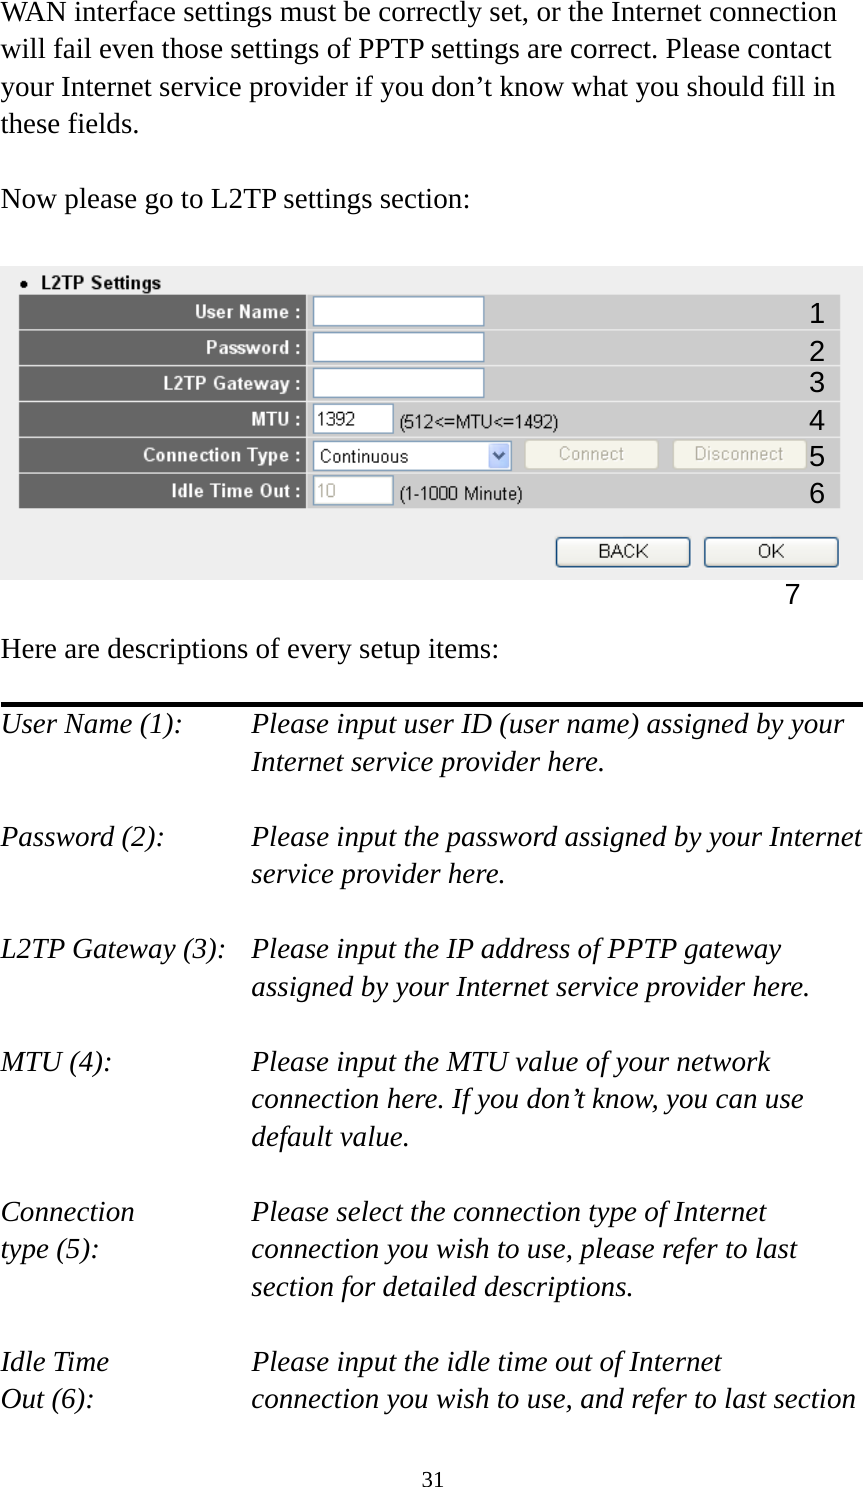 31 WAN interface settings must be correctly set, or the Internet connection will fail even those settings of PPTP settings are correct. Please contact your Internet service provider if you don’t know what you should fill in these fields.  Now please go to L2TP settings section:    Here are descriptions of every setup items:  User Name (1):     Please input user ID (user name) assigned by your      Internet service provider here.  Password (2):    Please input the password assigned by your Internet service provider here.  L2TP Gateway (3):   Please input the IP address of PPTP gateway assigned by your Internet service provider here.  MTU (4):    Please input the MTU value of your network connection here. If you don’t know, you can use default value.  Connection       Please select the connection type of Internet type (5):    connection you wish to use, please refer to last section for detailed descriptions.  Idle Time        Please input the idle time out of Internet Out (6):    connection you wish to use, and refer to last section 1 2 4 3 5 7 6 